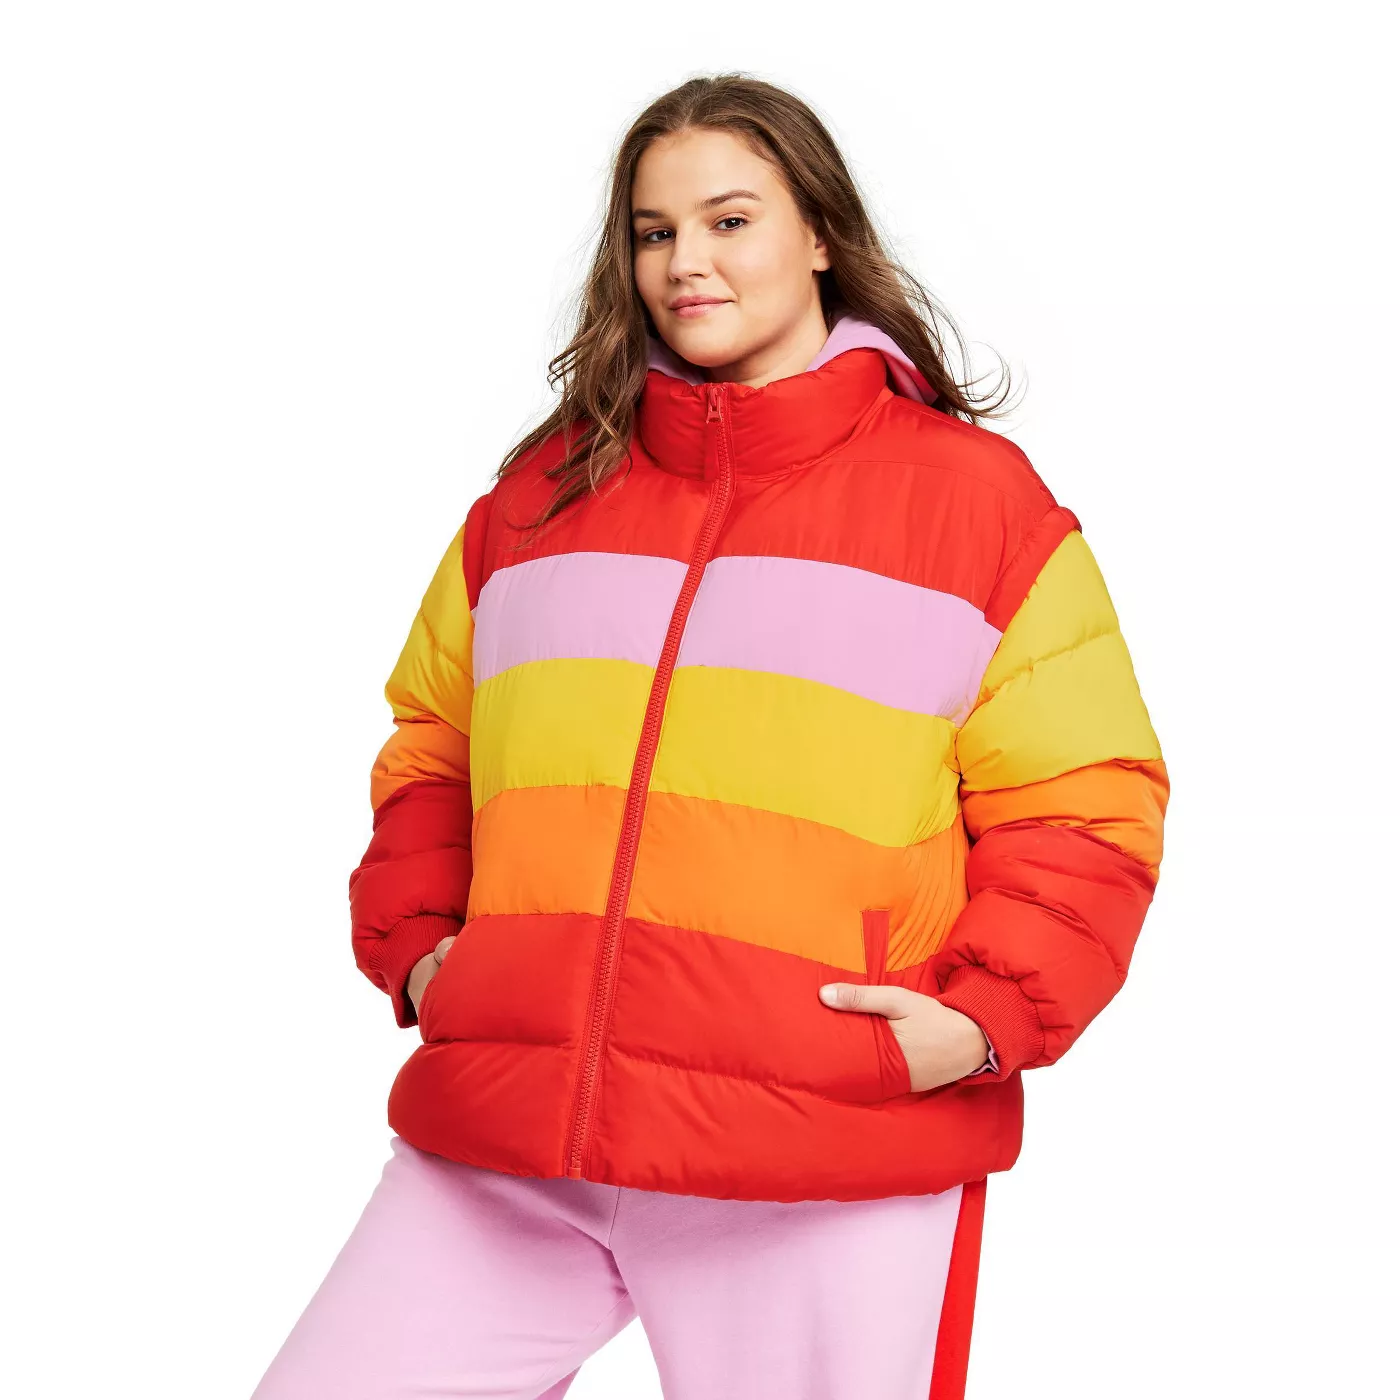 puffy jacket with lines of orange, yellow, pink, and red